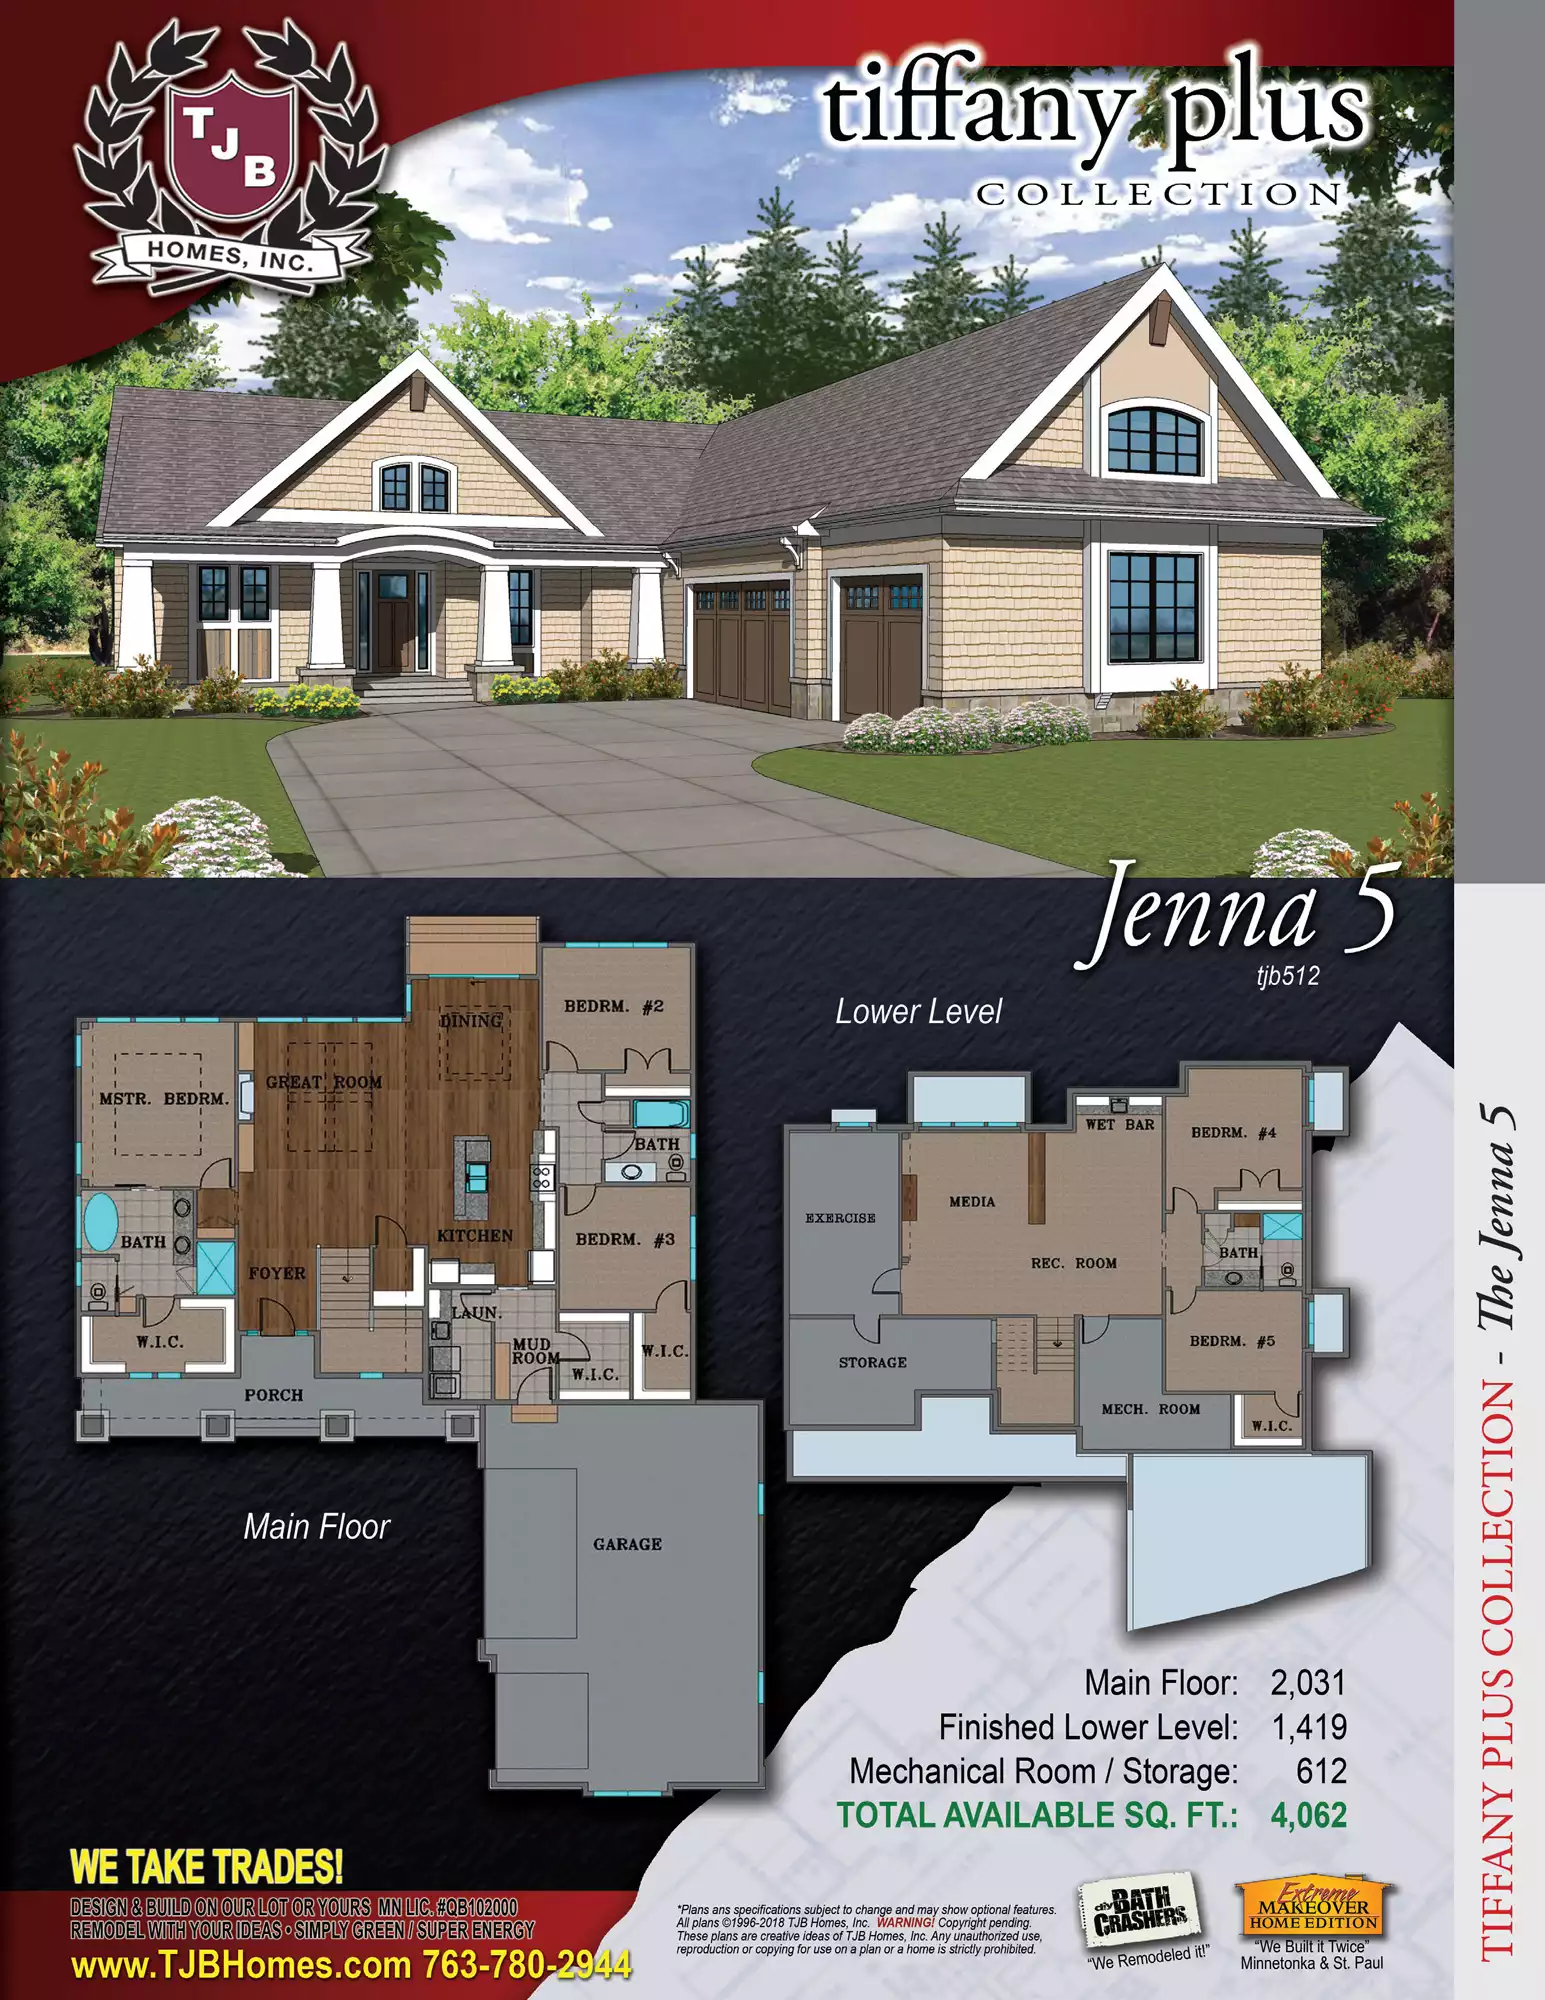 Luxury Dream Home Collection Pre-Priced Home Plan Jenna 5 #512 Floor Plans